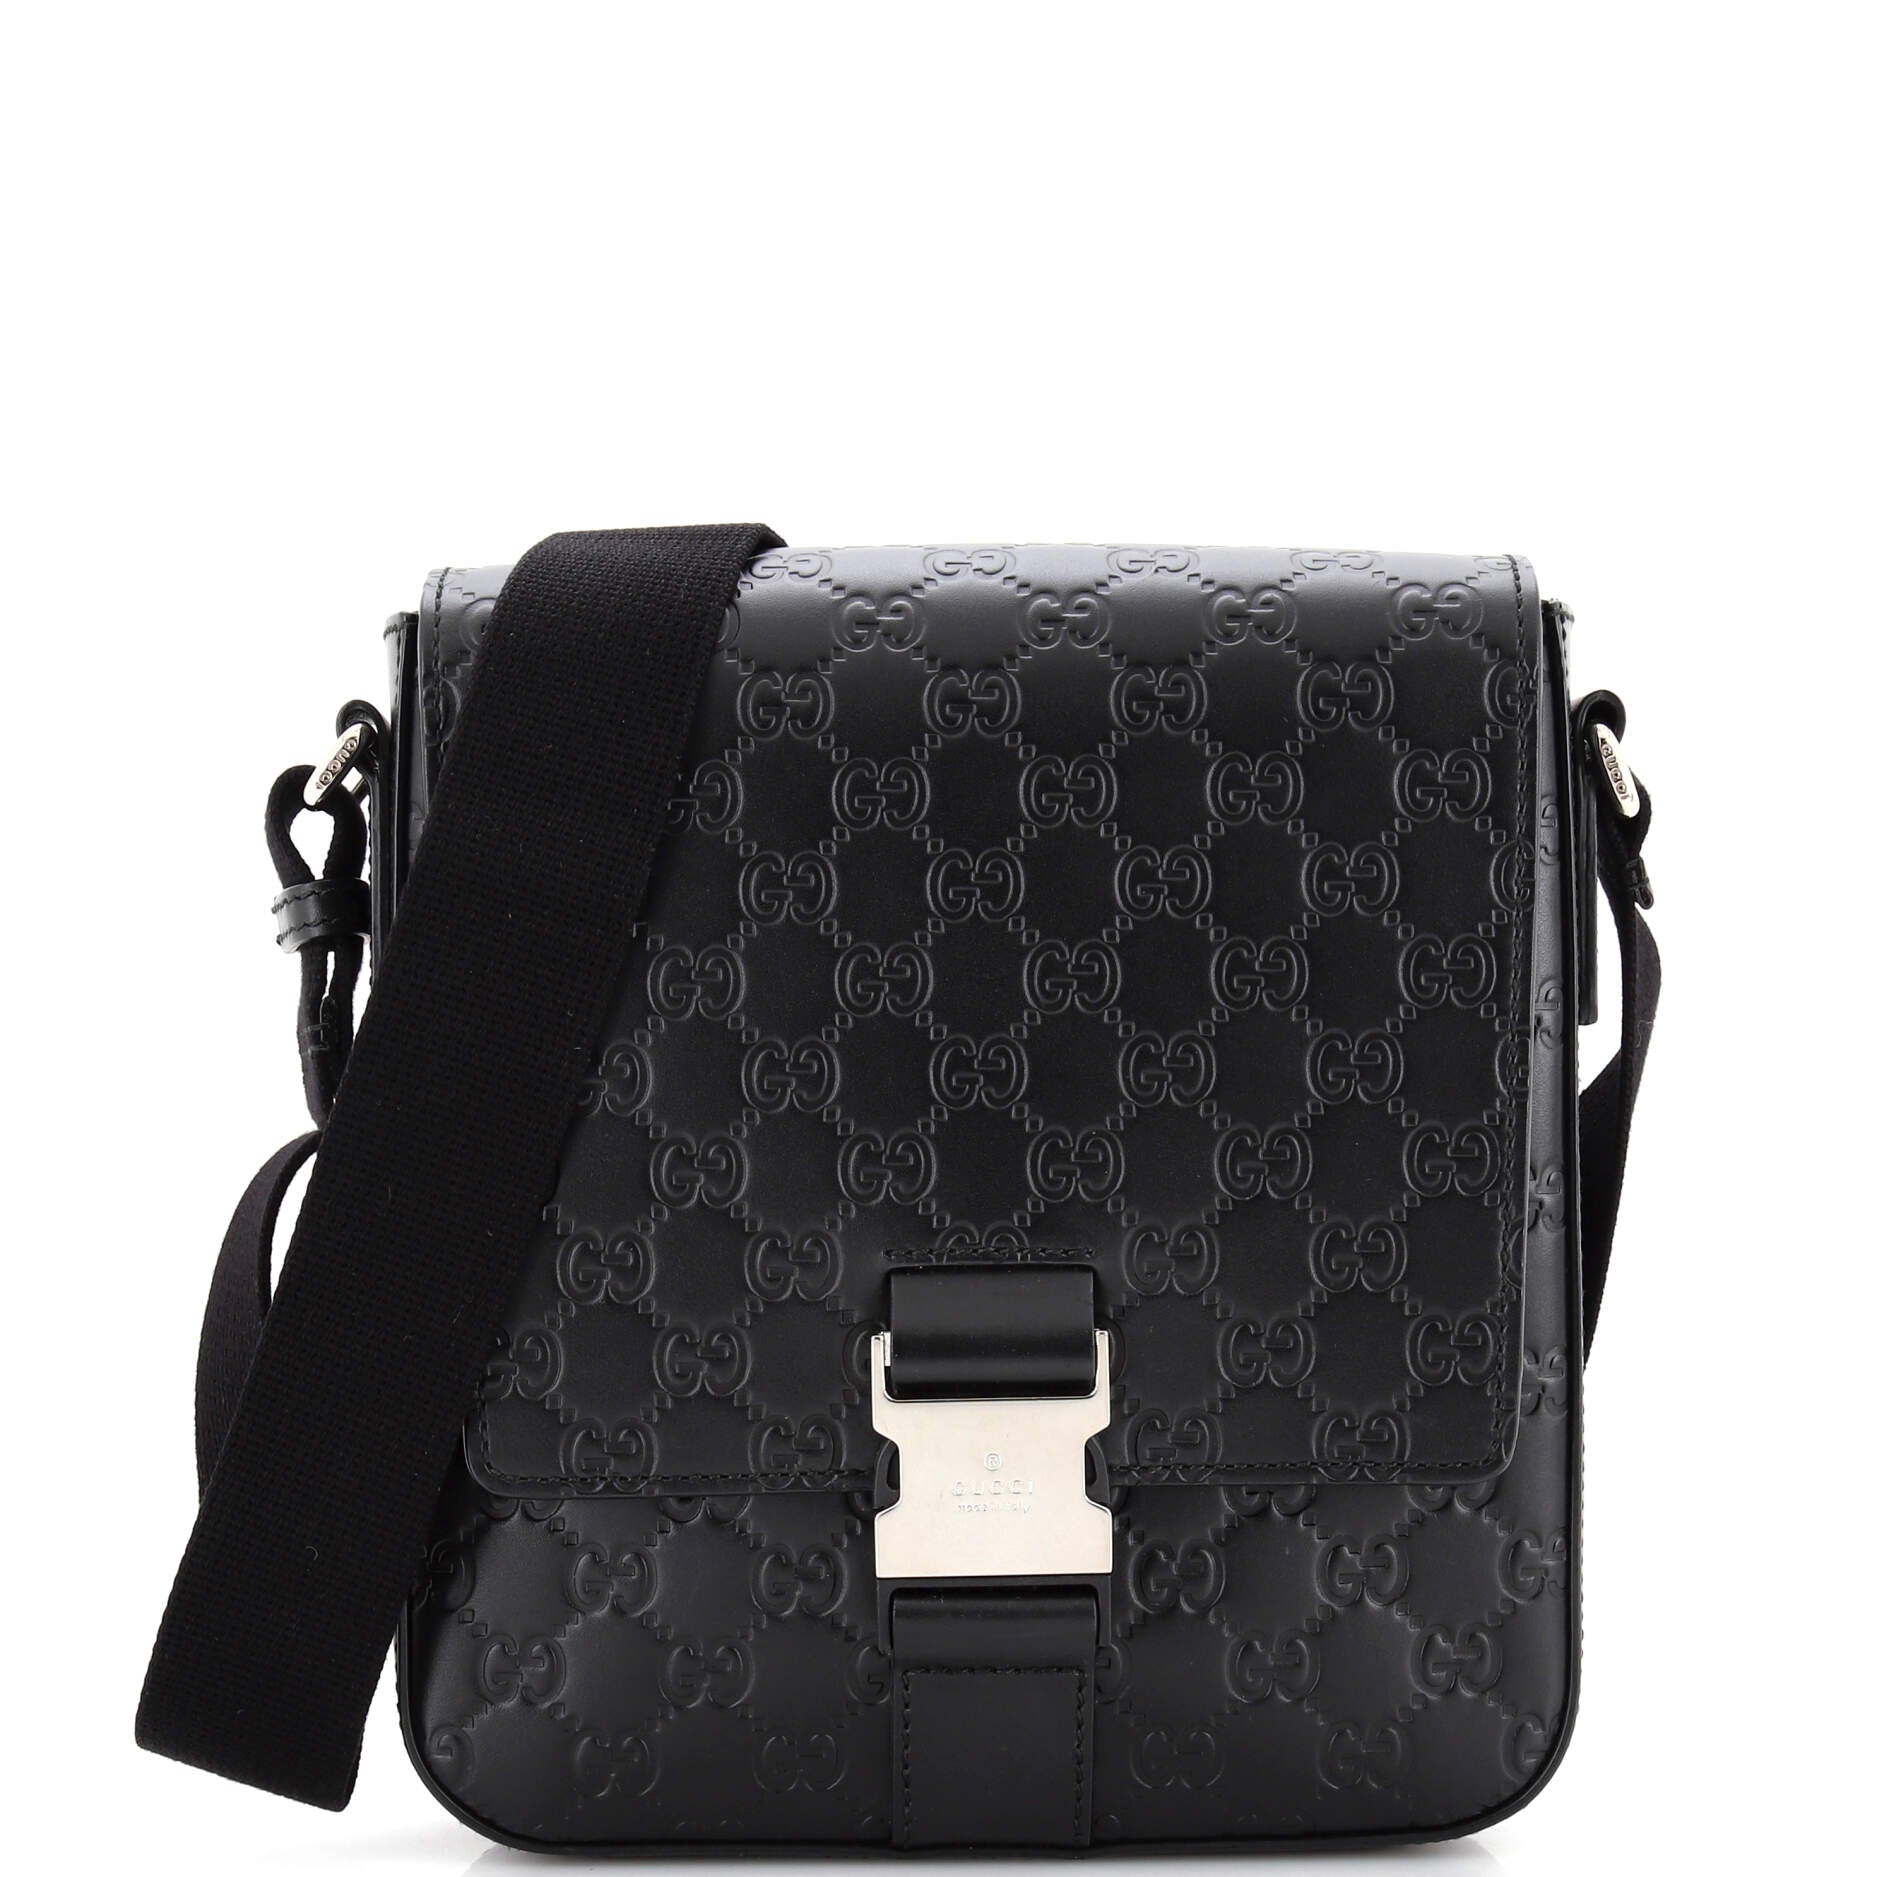 GUCCI GG GUCCISSIMA BLK CANVAS LEATHER TRIM FRONT BUCKLE POCKET